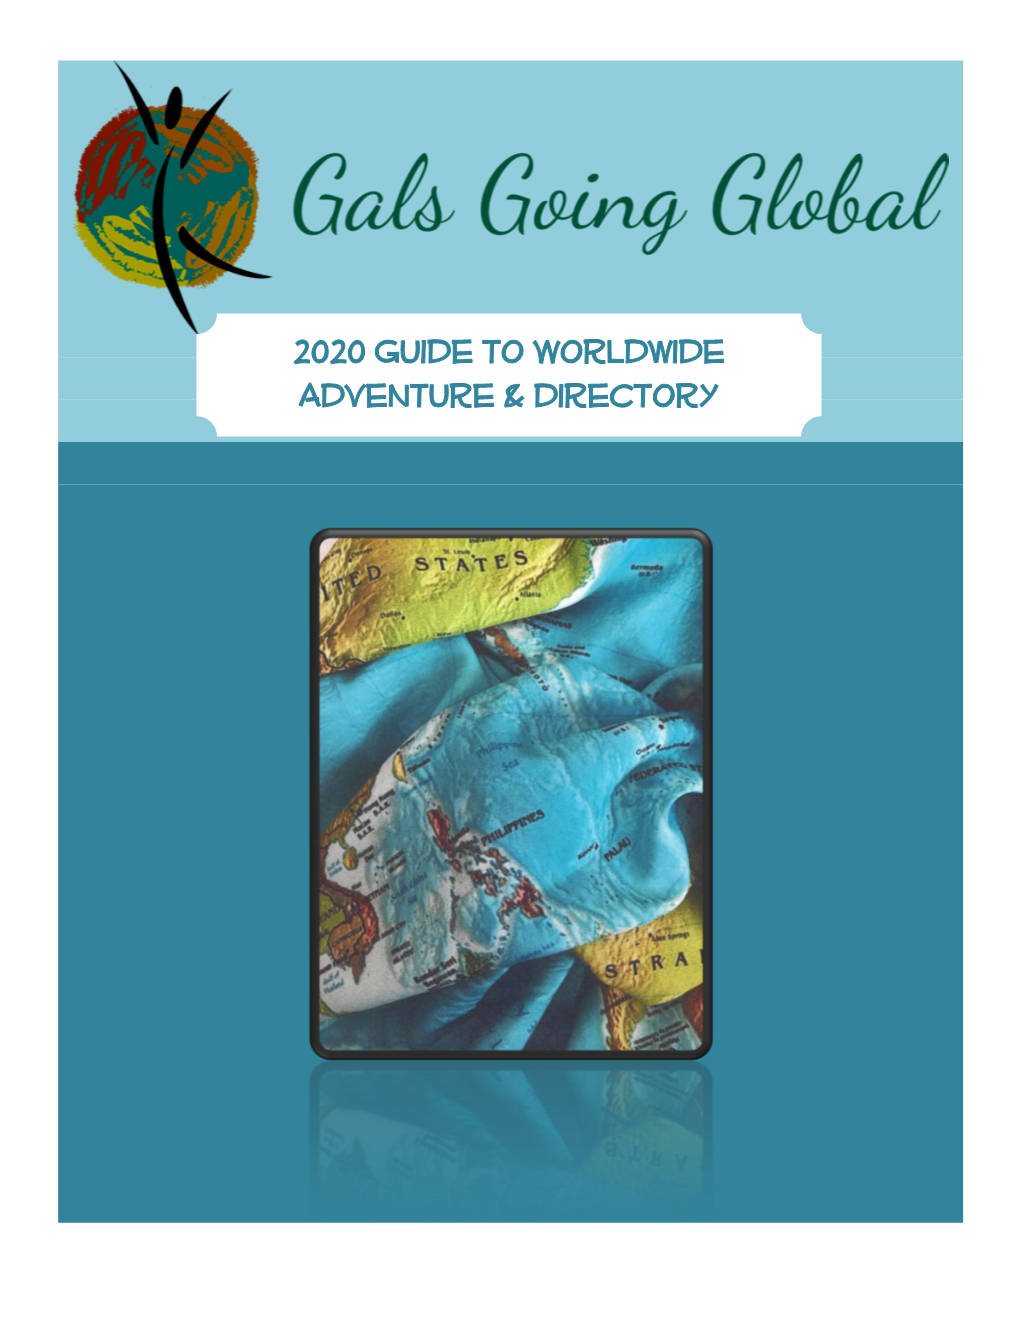 2020 Guide to Worldwide Adventure & Directory